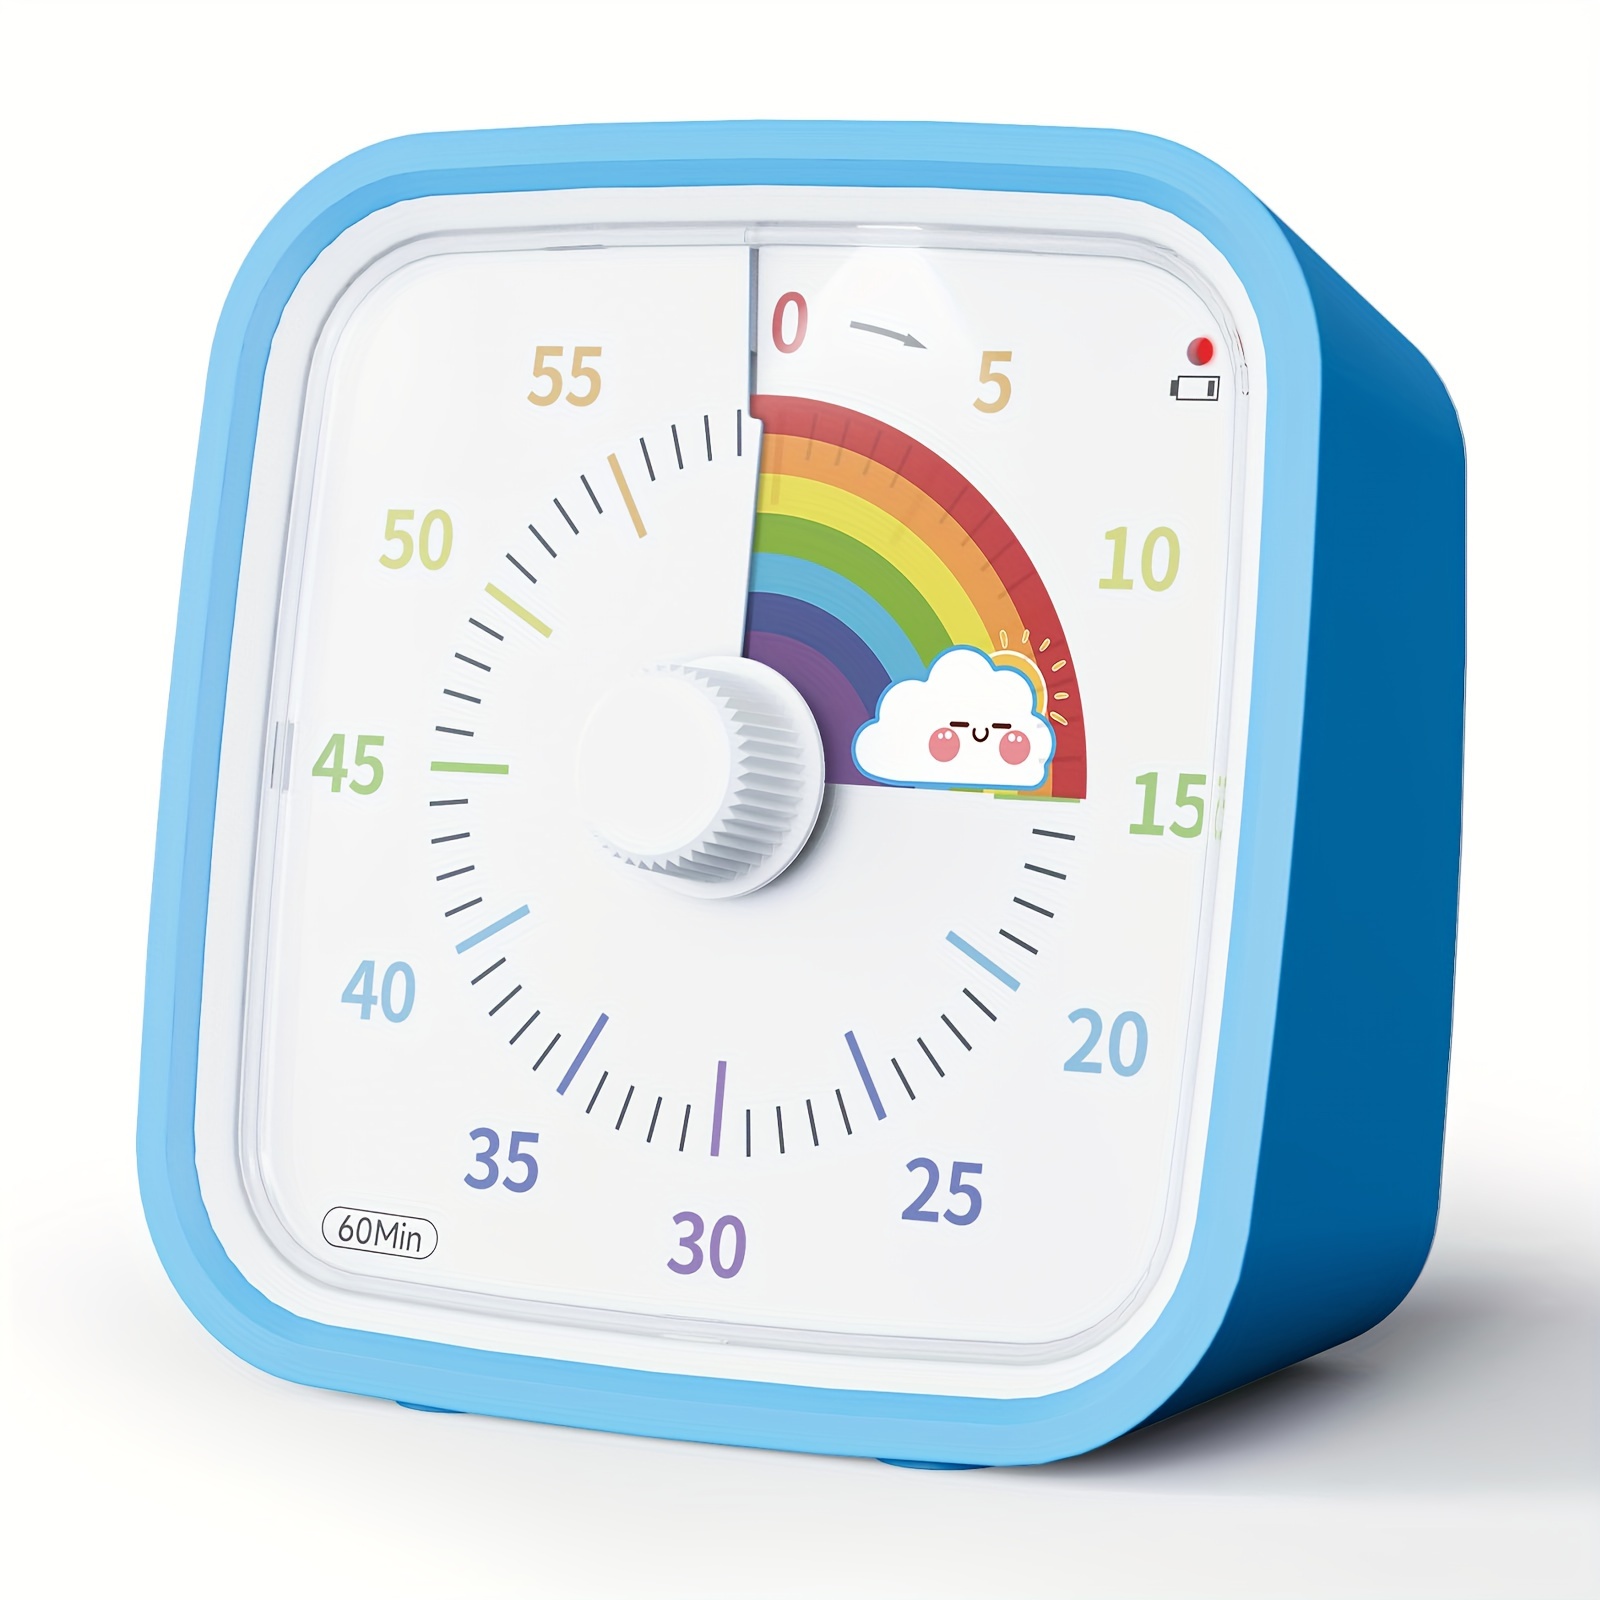 

1pc, Timer, 60 Minute Visual Timer With Protective Case, Rainbow Disk Countdown Game Timer, Silent Time Management Tool For Study, Working, Exercising And Other Activities